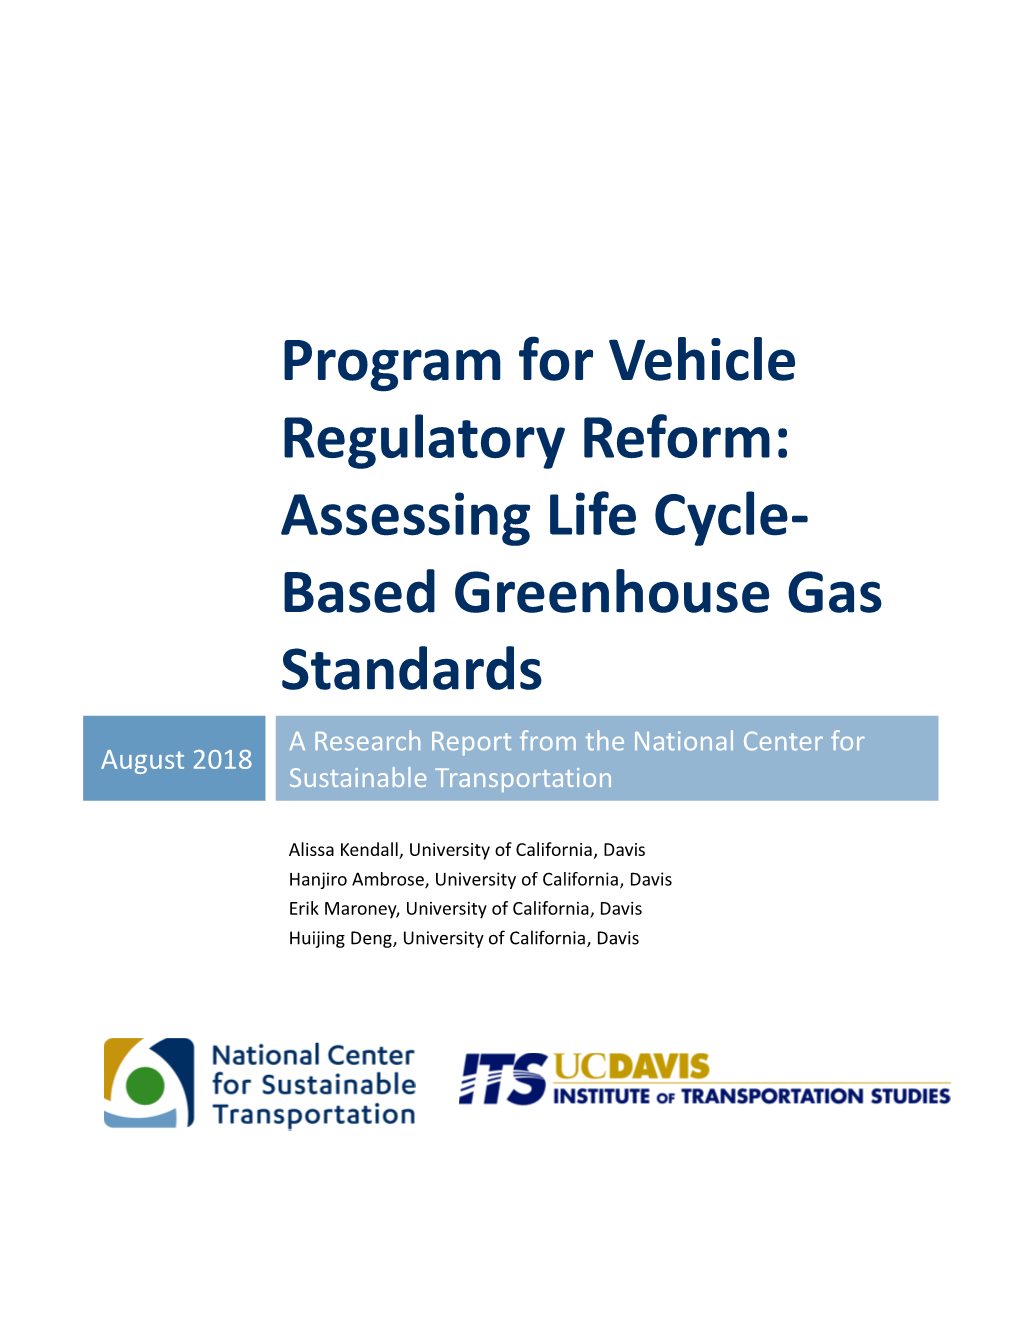 Assessing Life Cycle-Based Greenhouse Gas Standards a National Center for Sustainable Transportation Research Report